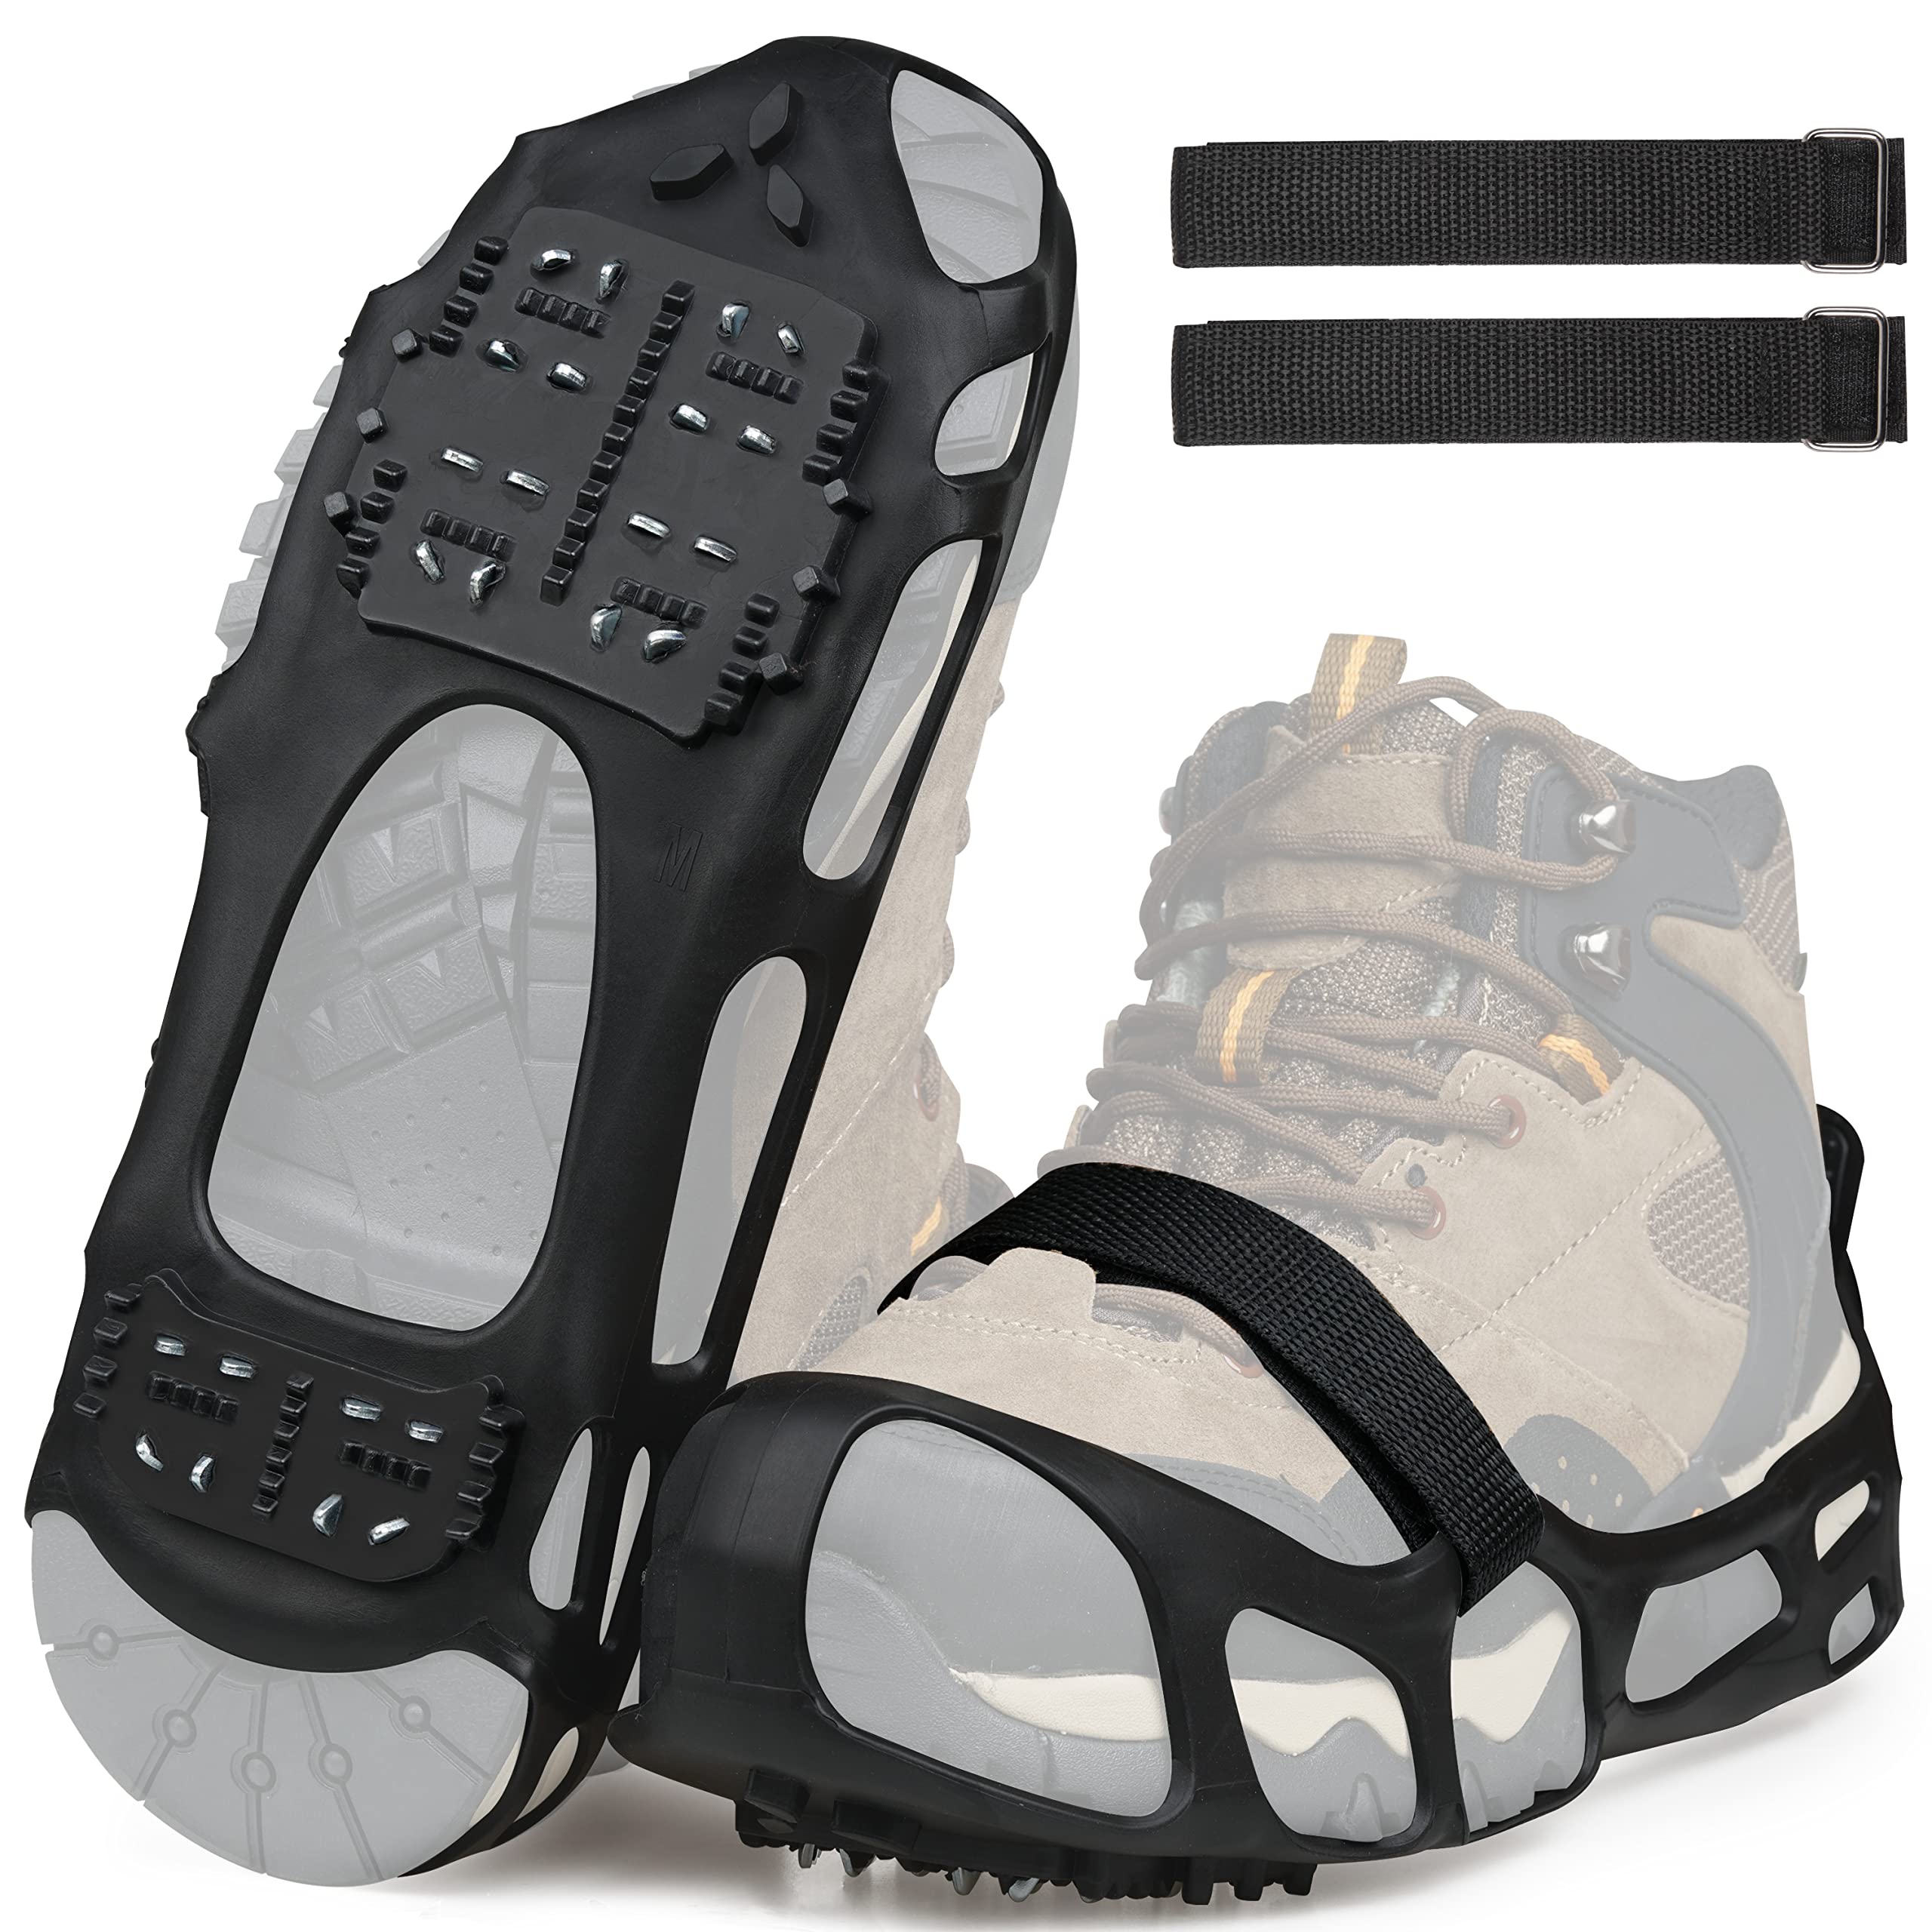 Ice Cleats for Shoes and Boots,Snow Traction Cleats Crampons for